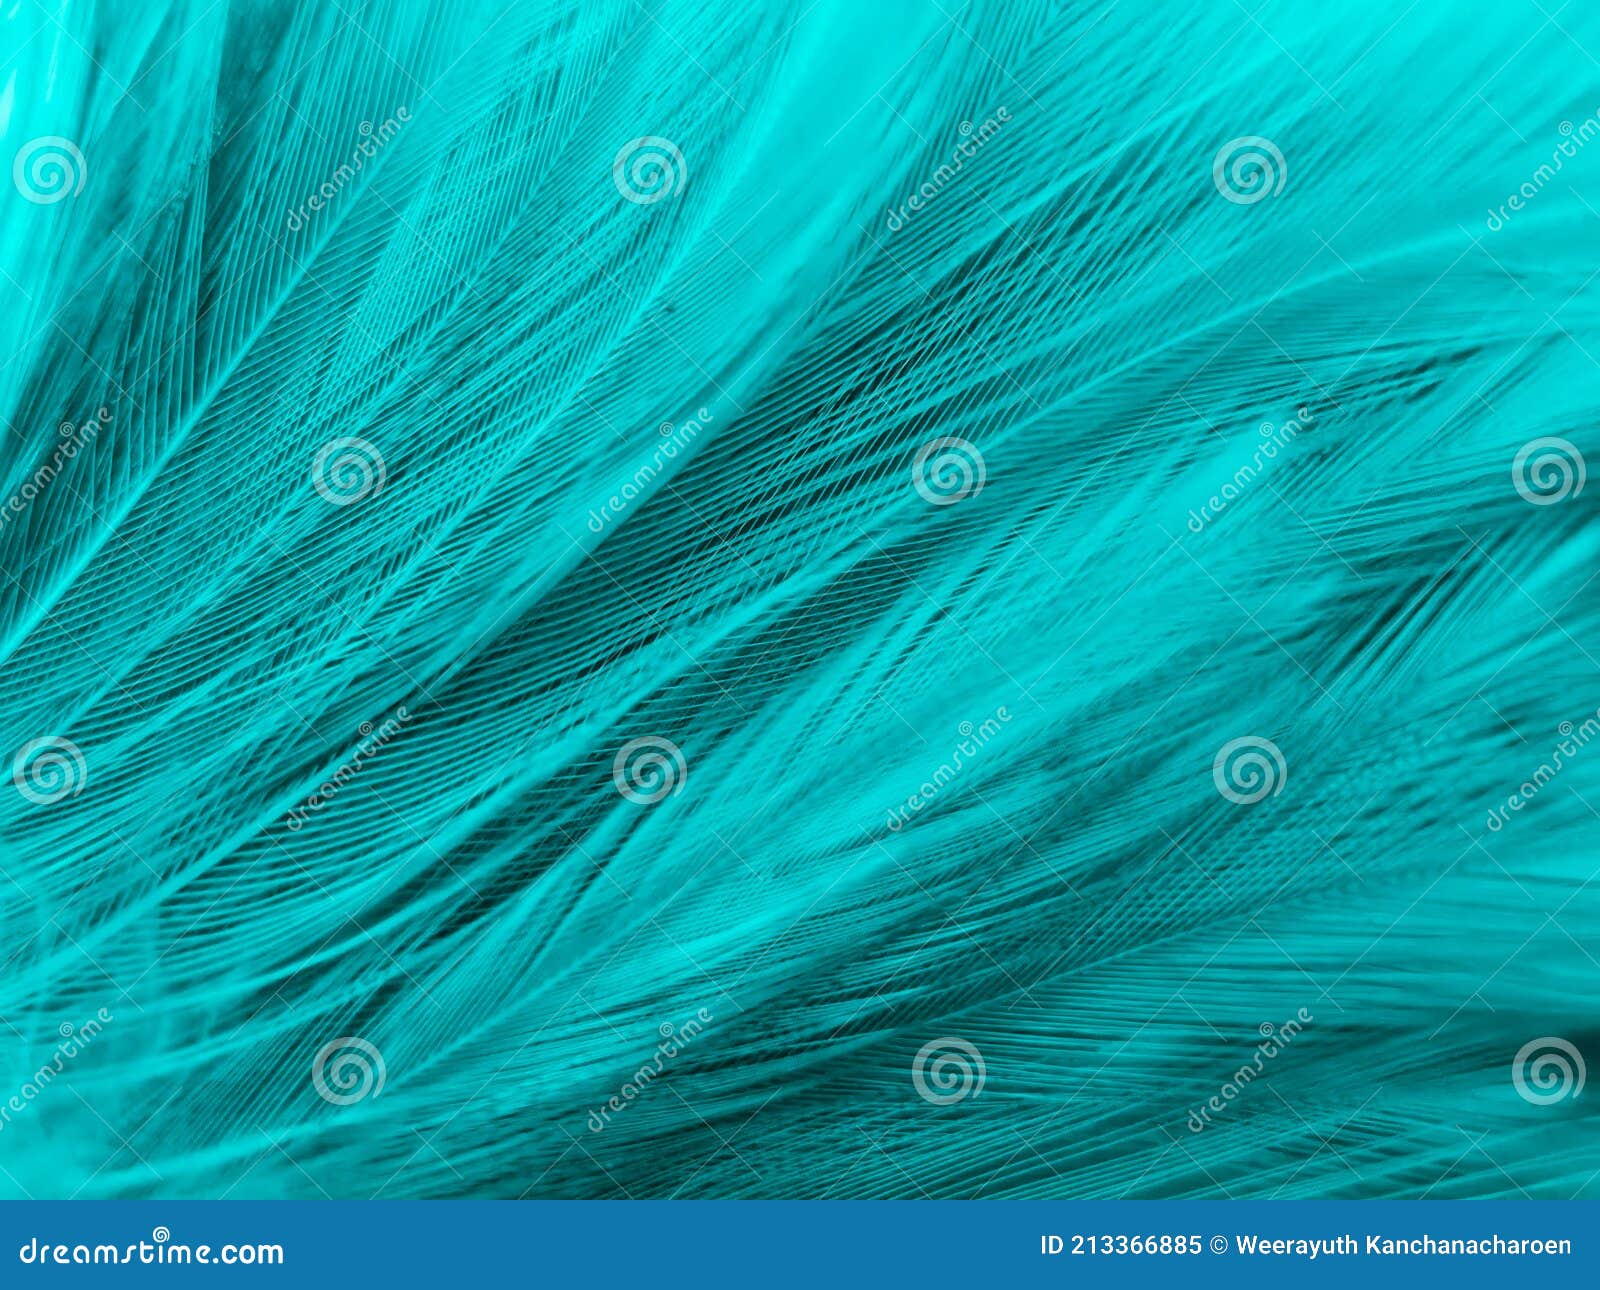 Background Of Textured Black Feathers, Feather Texture, Bird Feather,  Feather Background Image And Wallpaper for Free Download